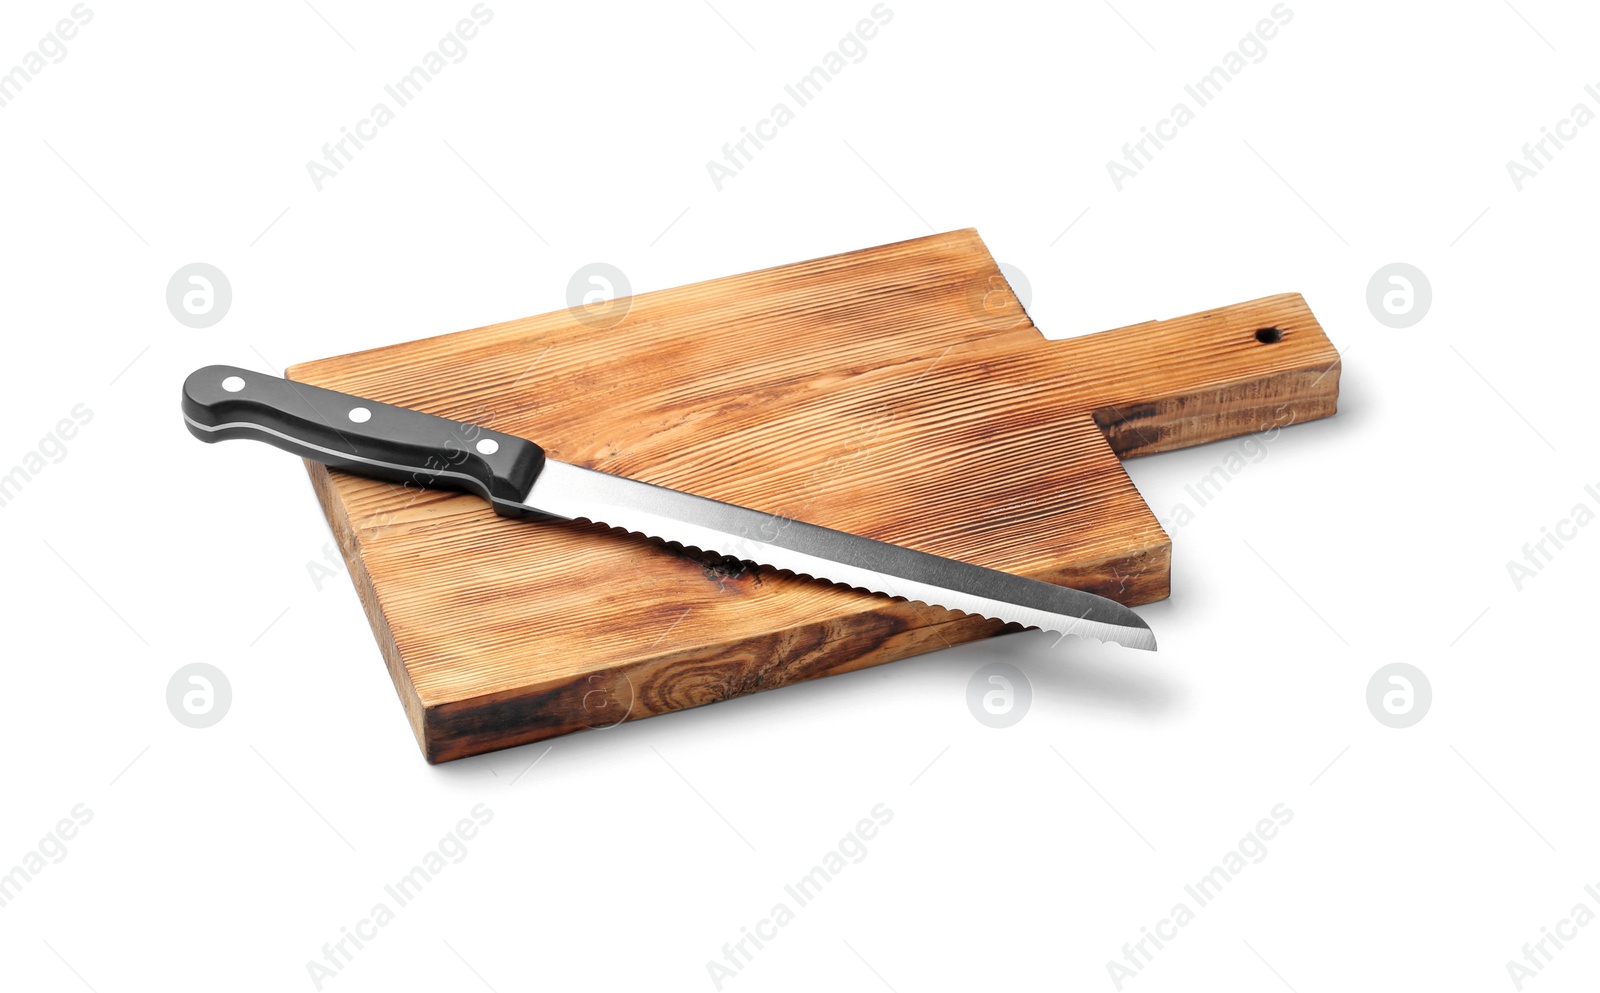 Photo of Stainless steel bread knife with plastic handle on board against white background